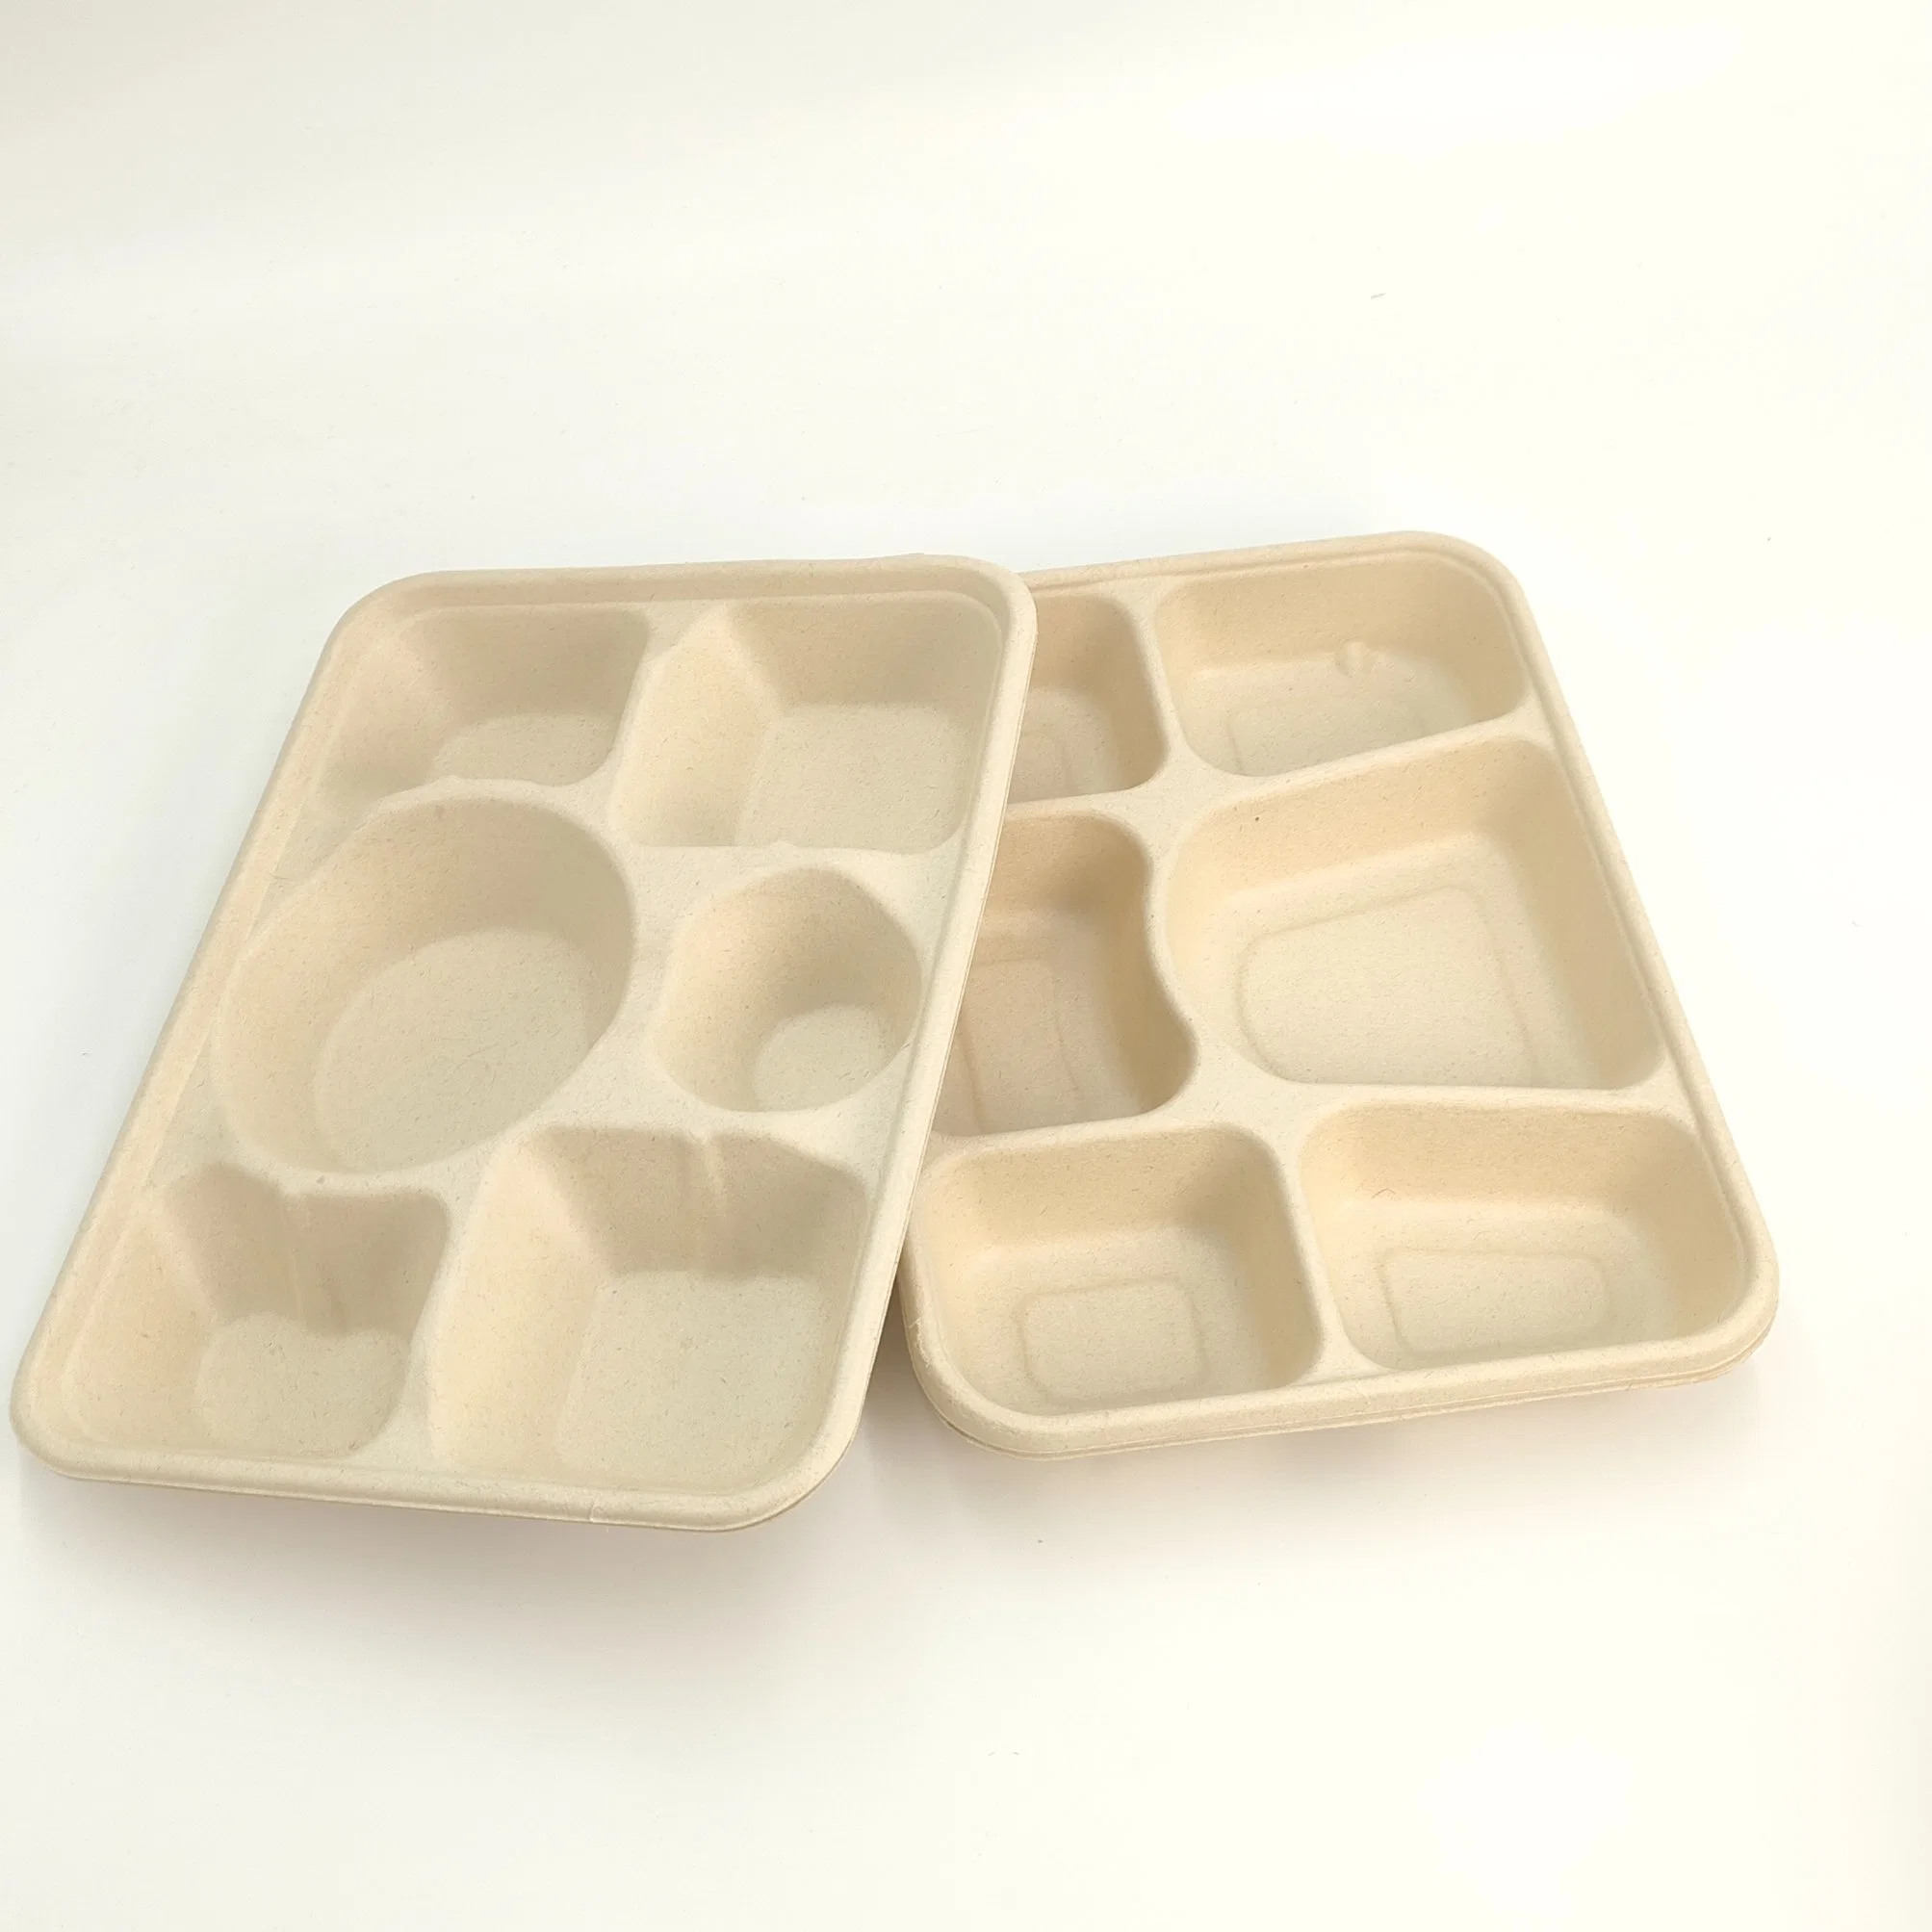 Microwave Safe Envase Biodegradable Compartment Biodegradable Paper Lunch Box